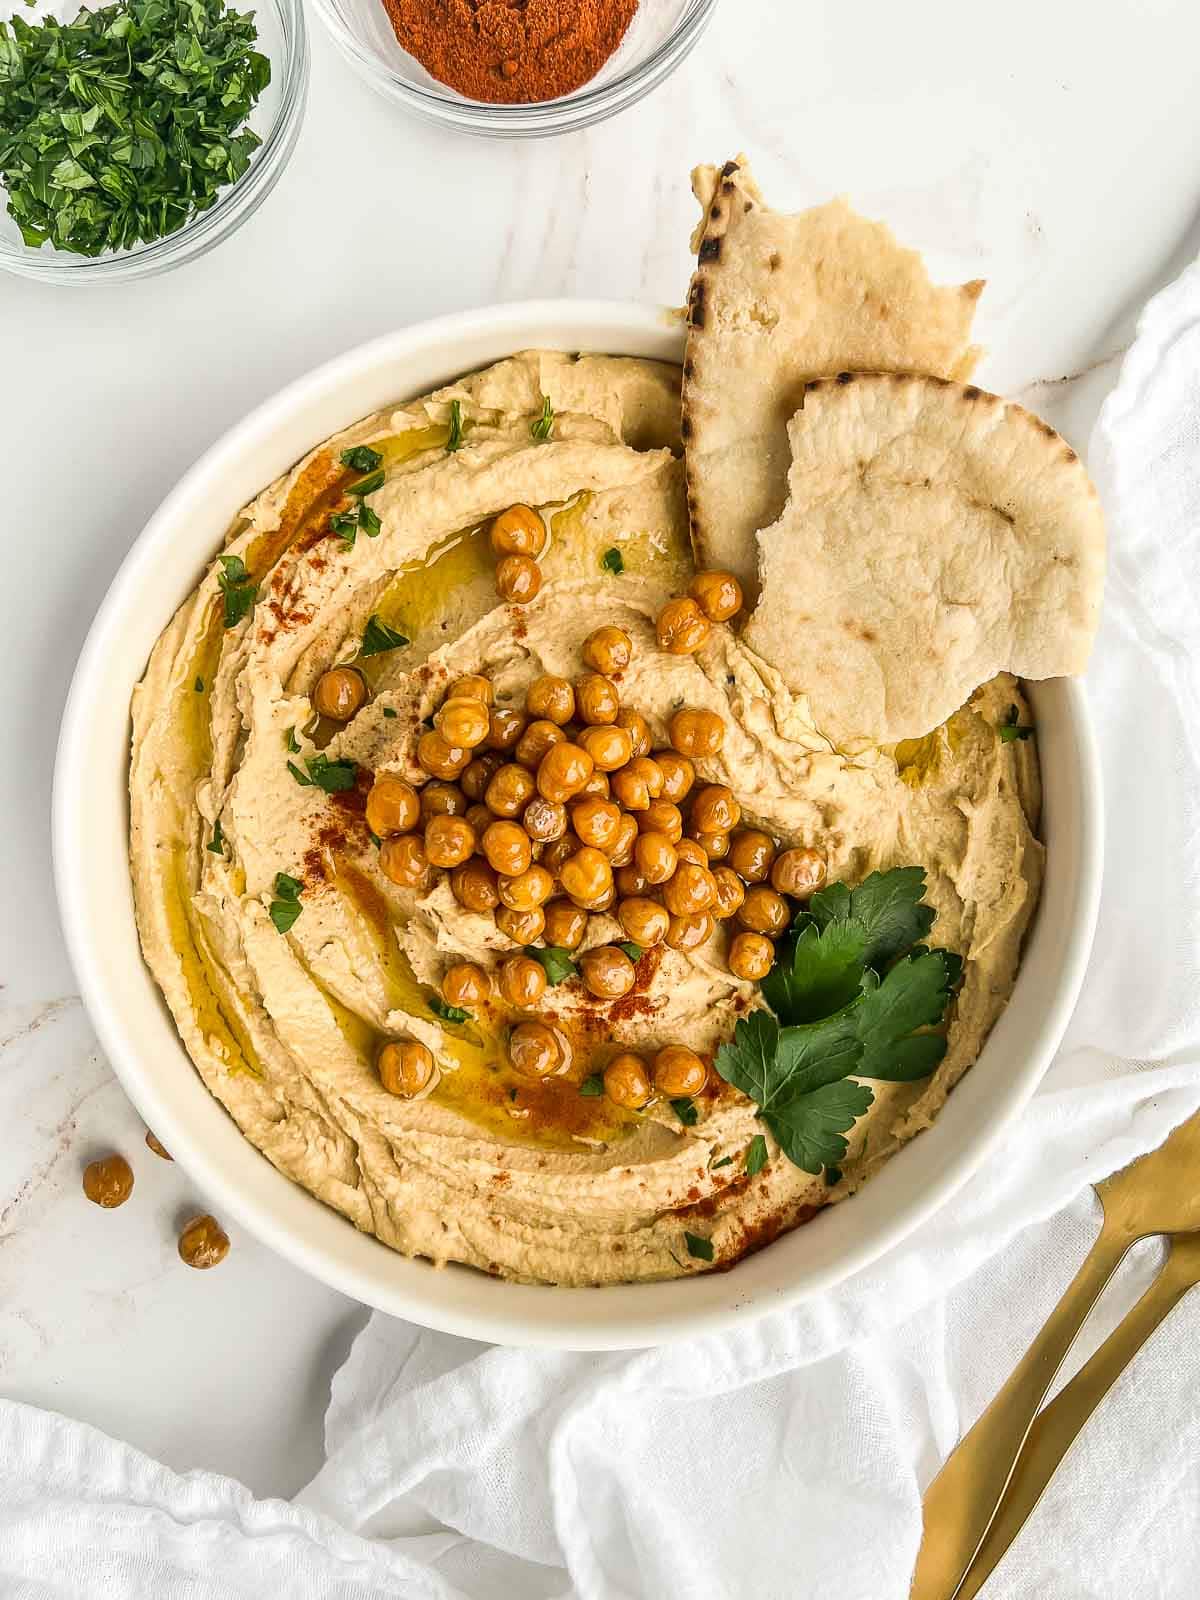 Bowl of hummus topped with crispy chickpeas, paprika, parsley, and olive oil with a couple pieces of pita tucked in.